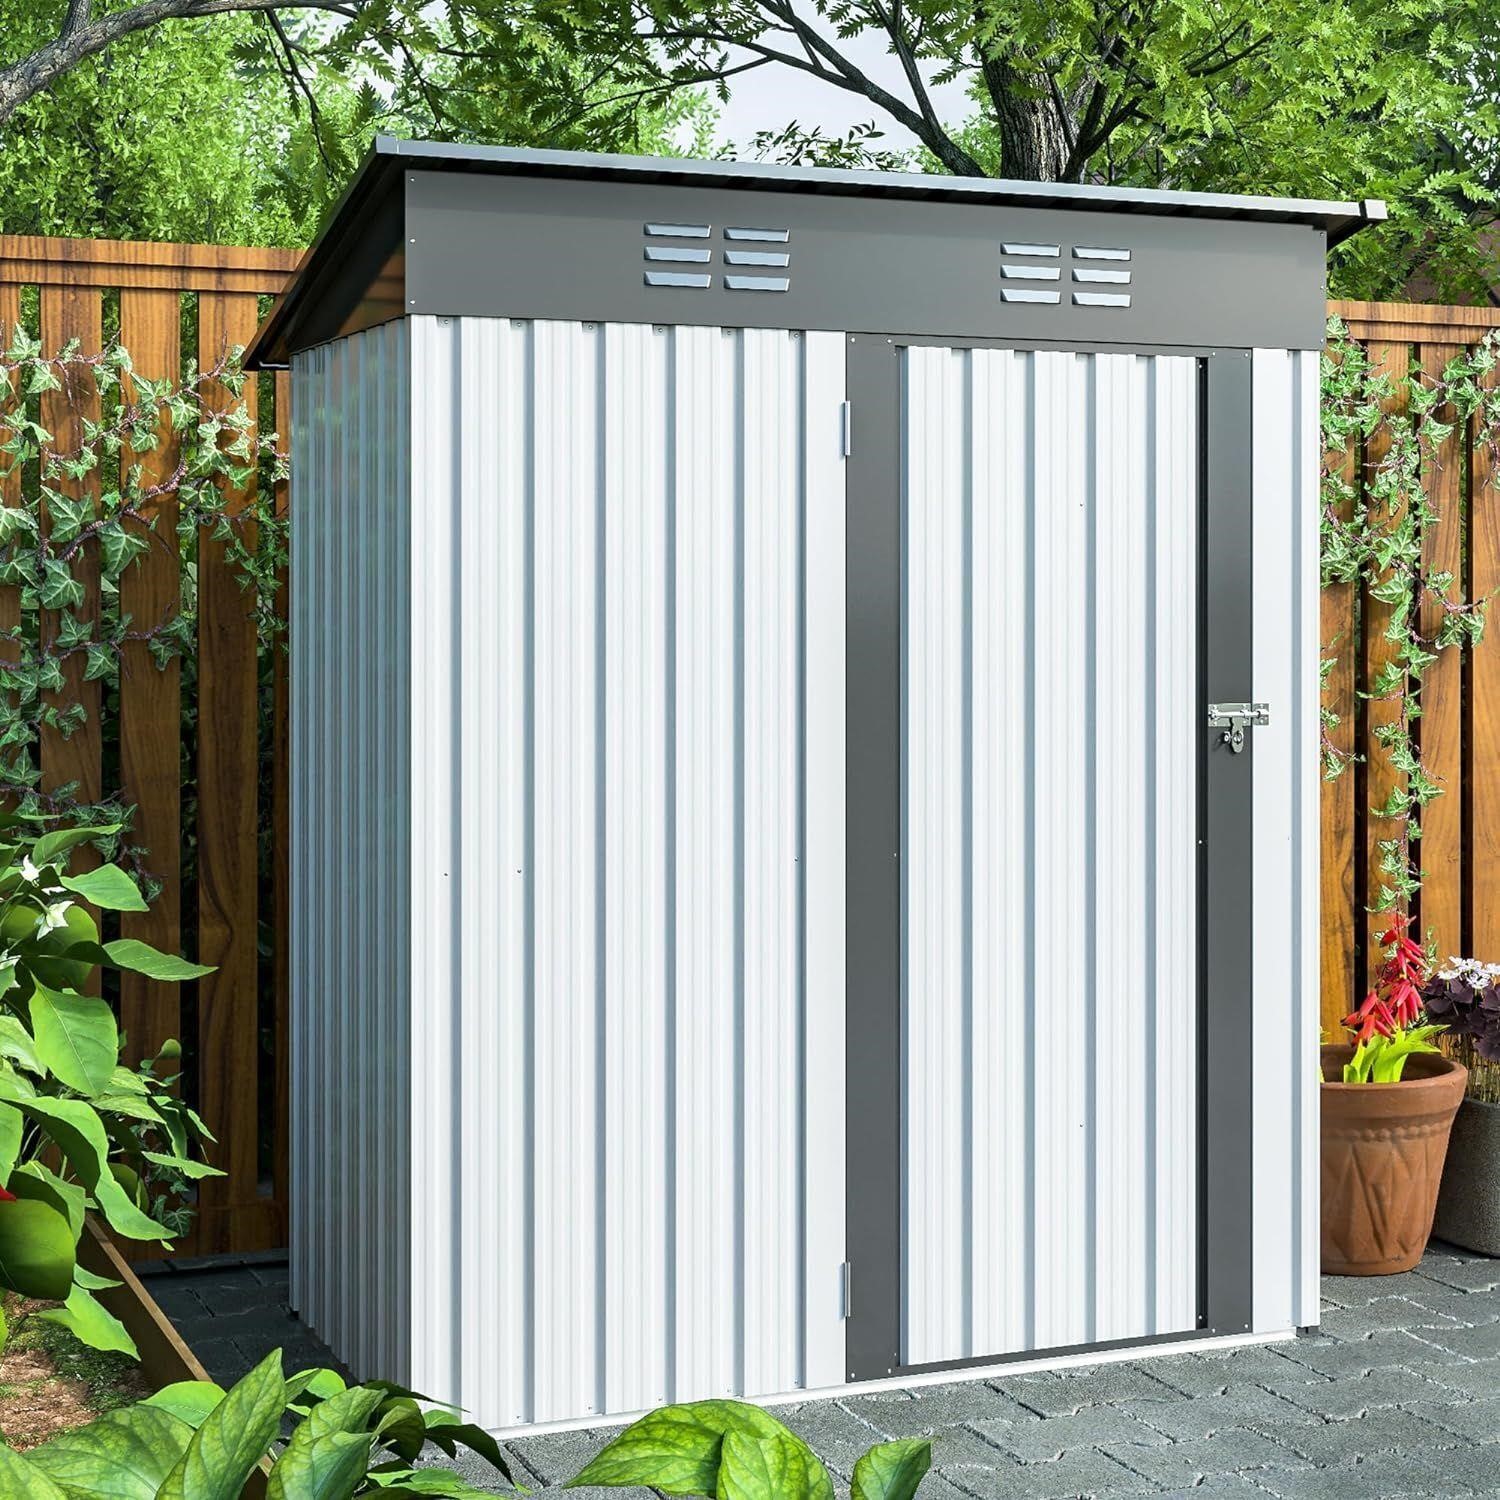 5'X3' Ft Outdoor Storage Shed